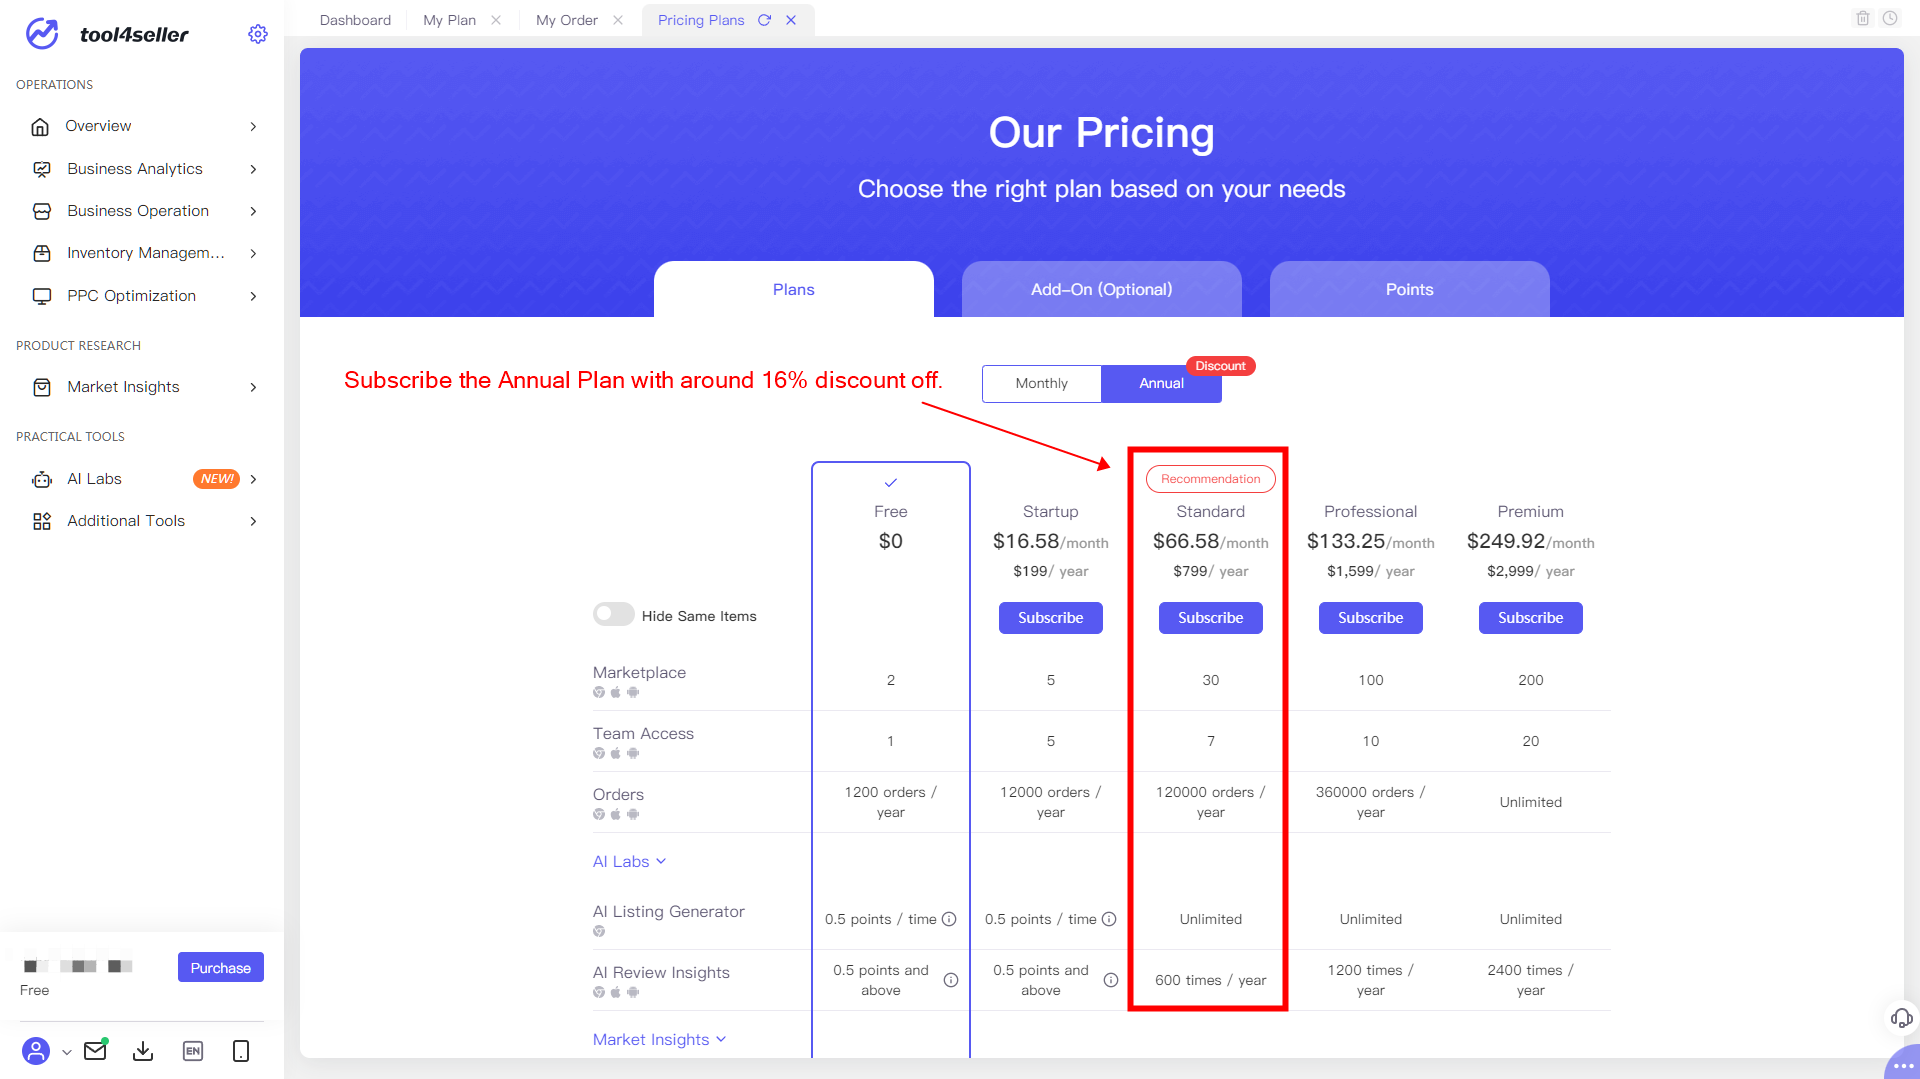 Tool4seller Pricing page - Amazon seller tool